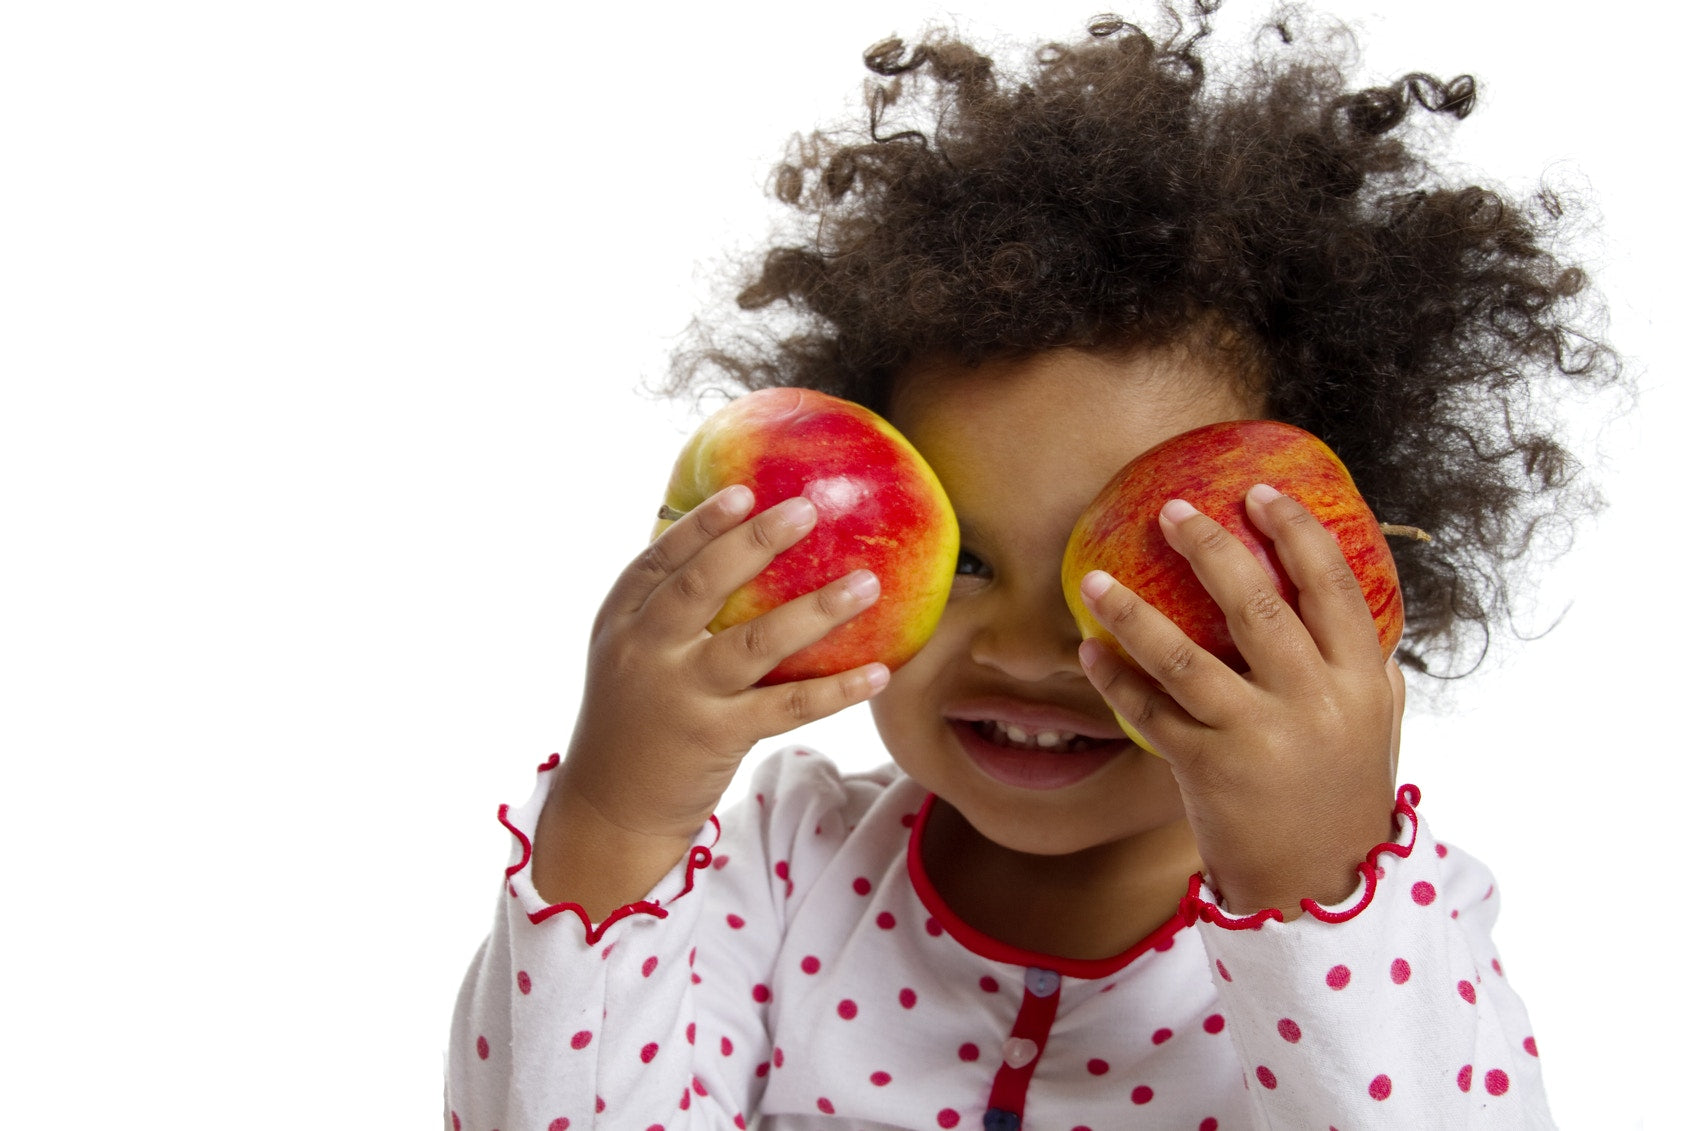 Toddler with two apples in his hand 